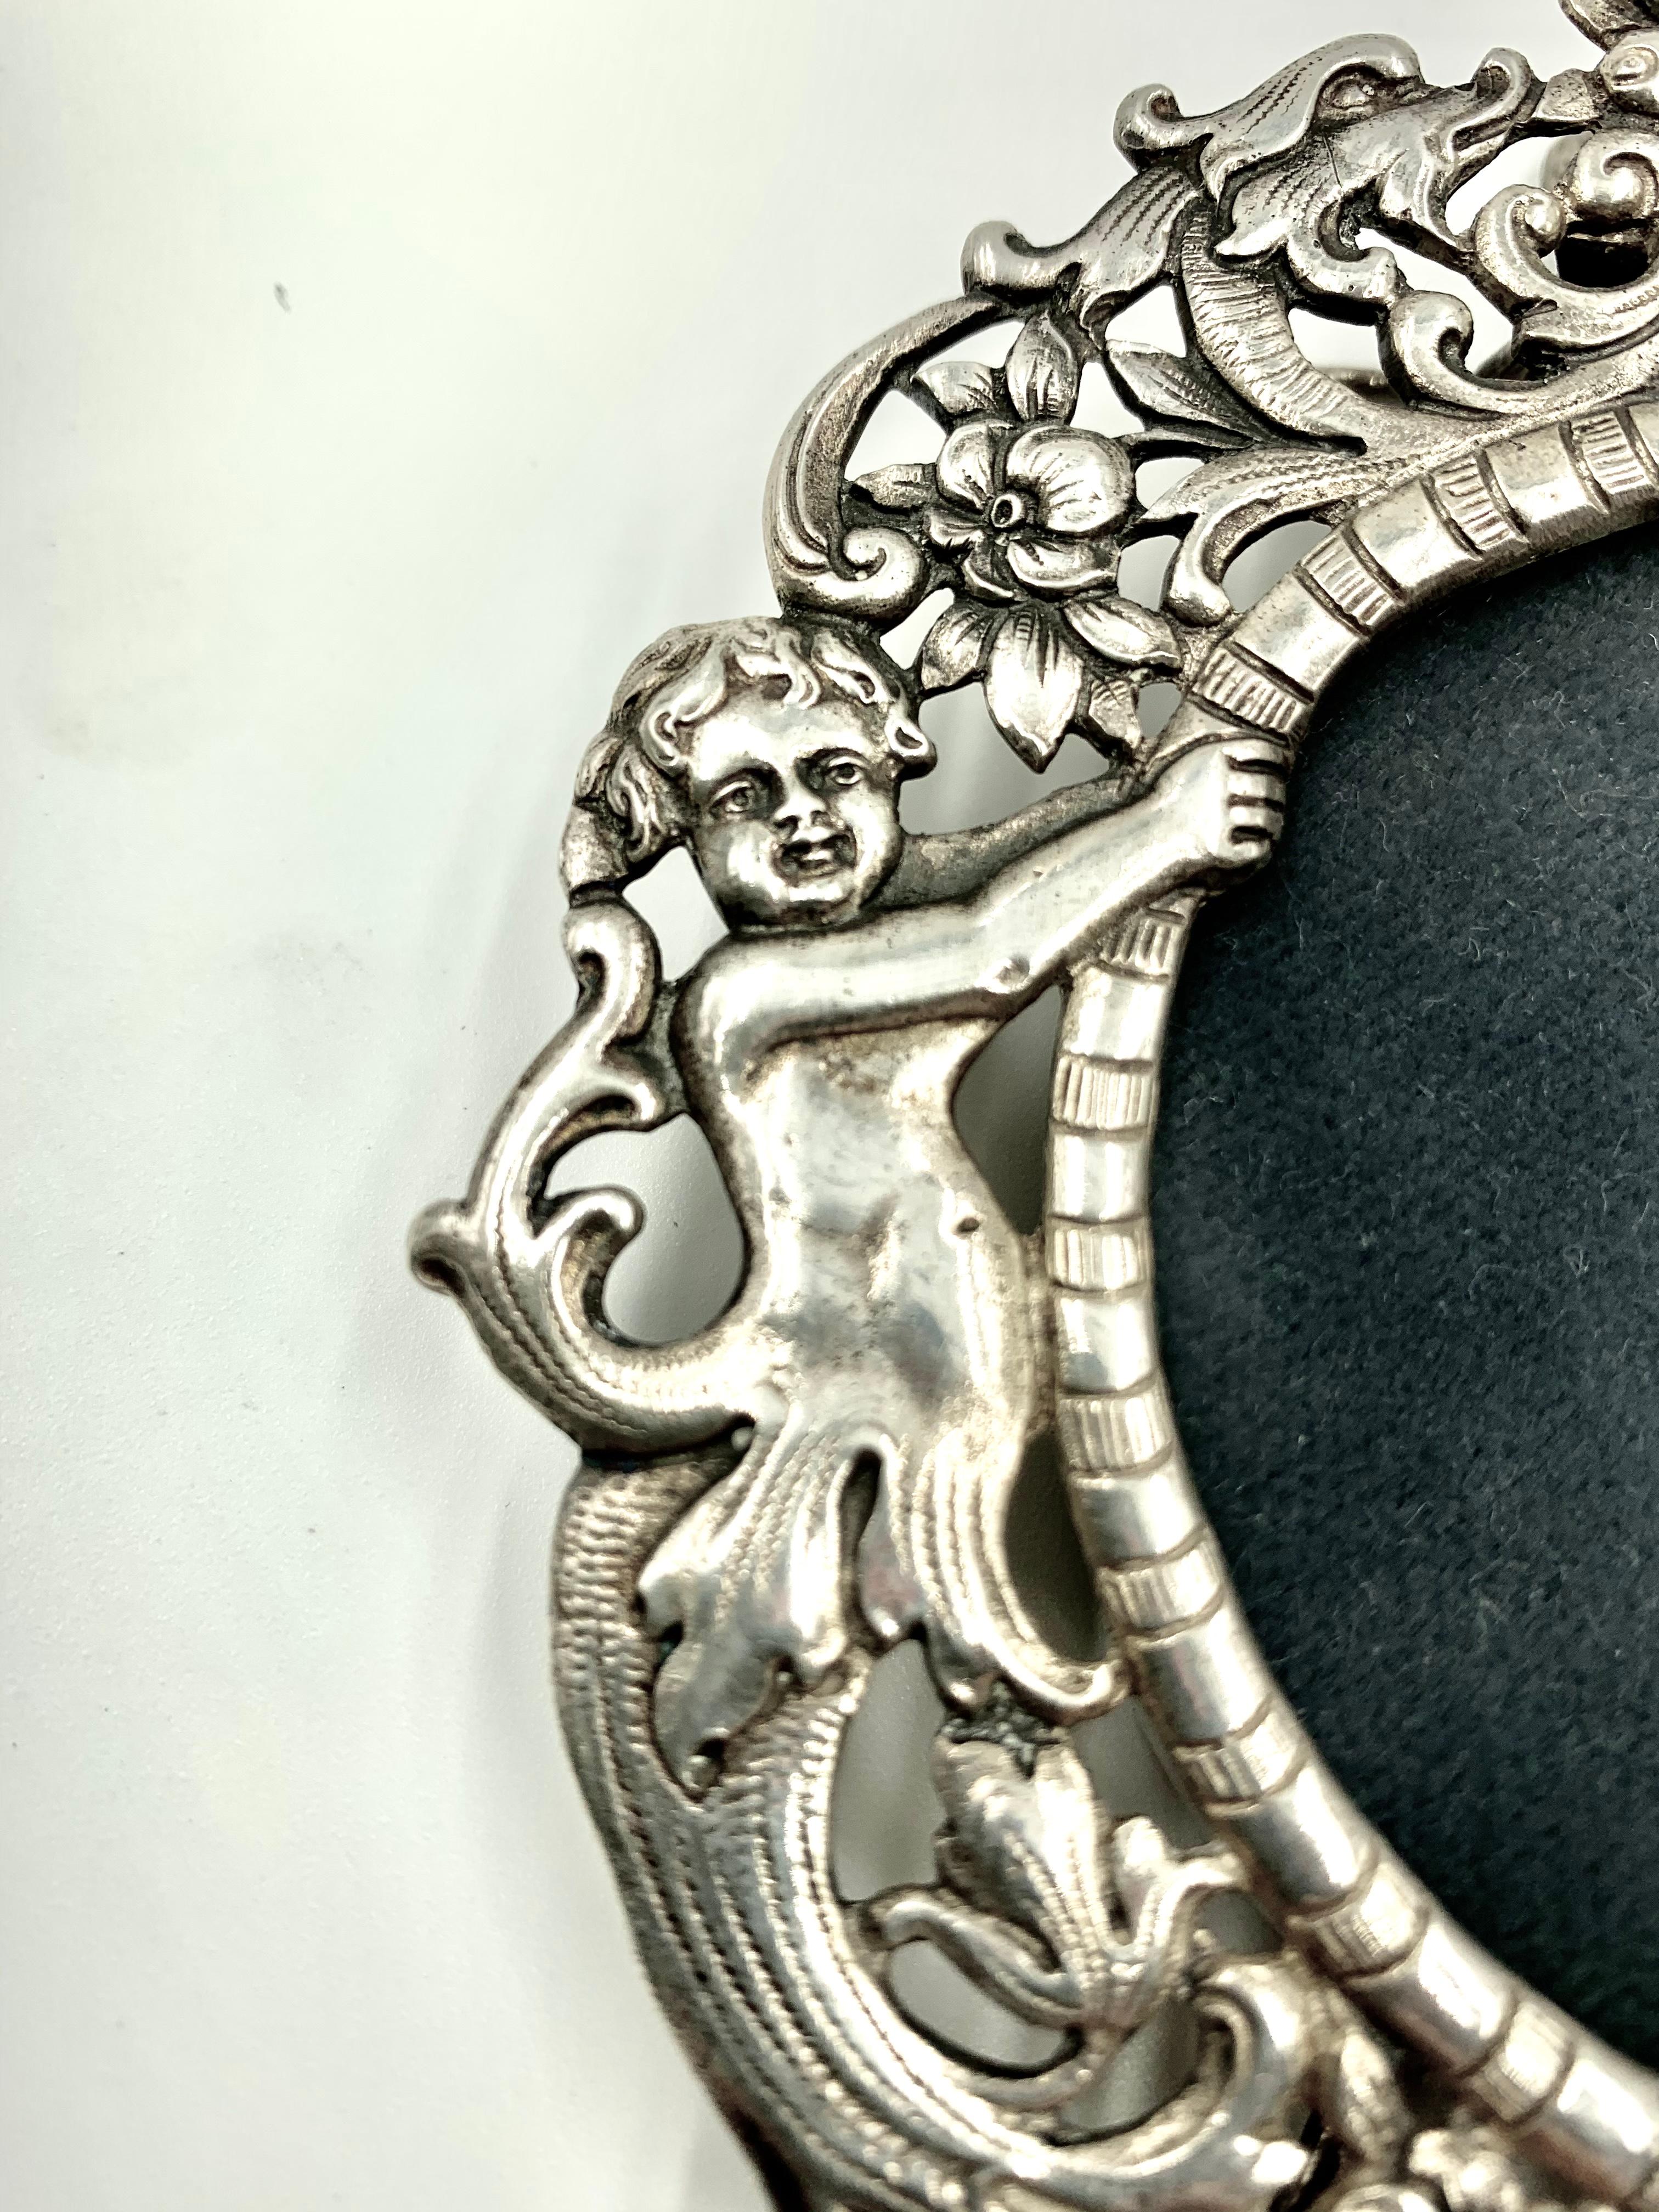 Fabulous European antique silver picture frame with a pair of angels on each side holding the oval of the frame amidst floral scroll decorations with a crest featuring a pair of dolphins flanking a central footed centerpiece filled with exotic